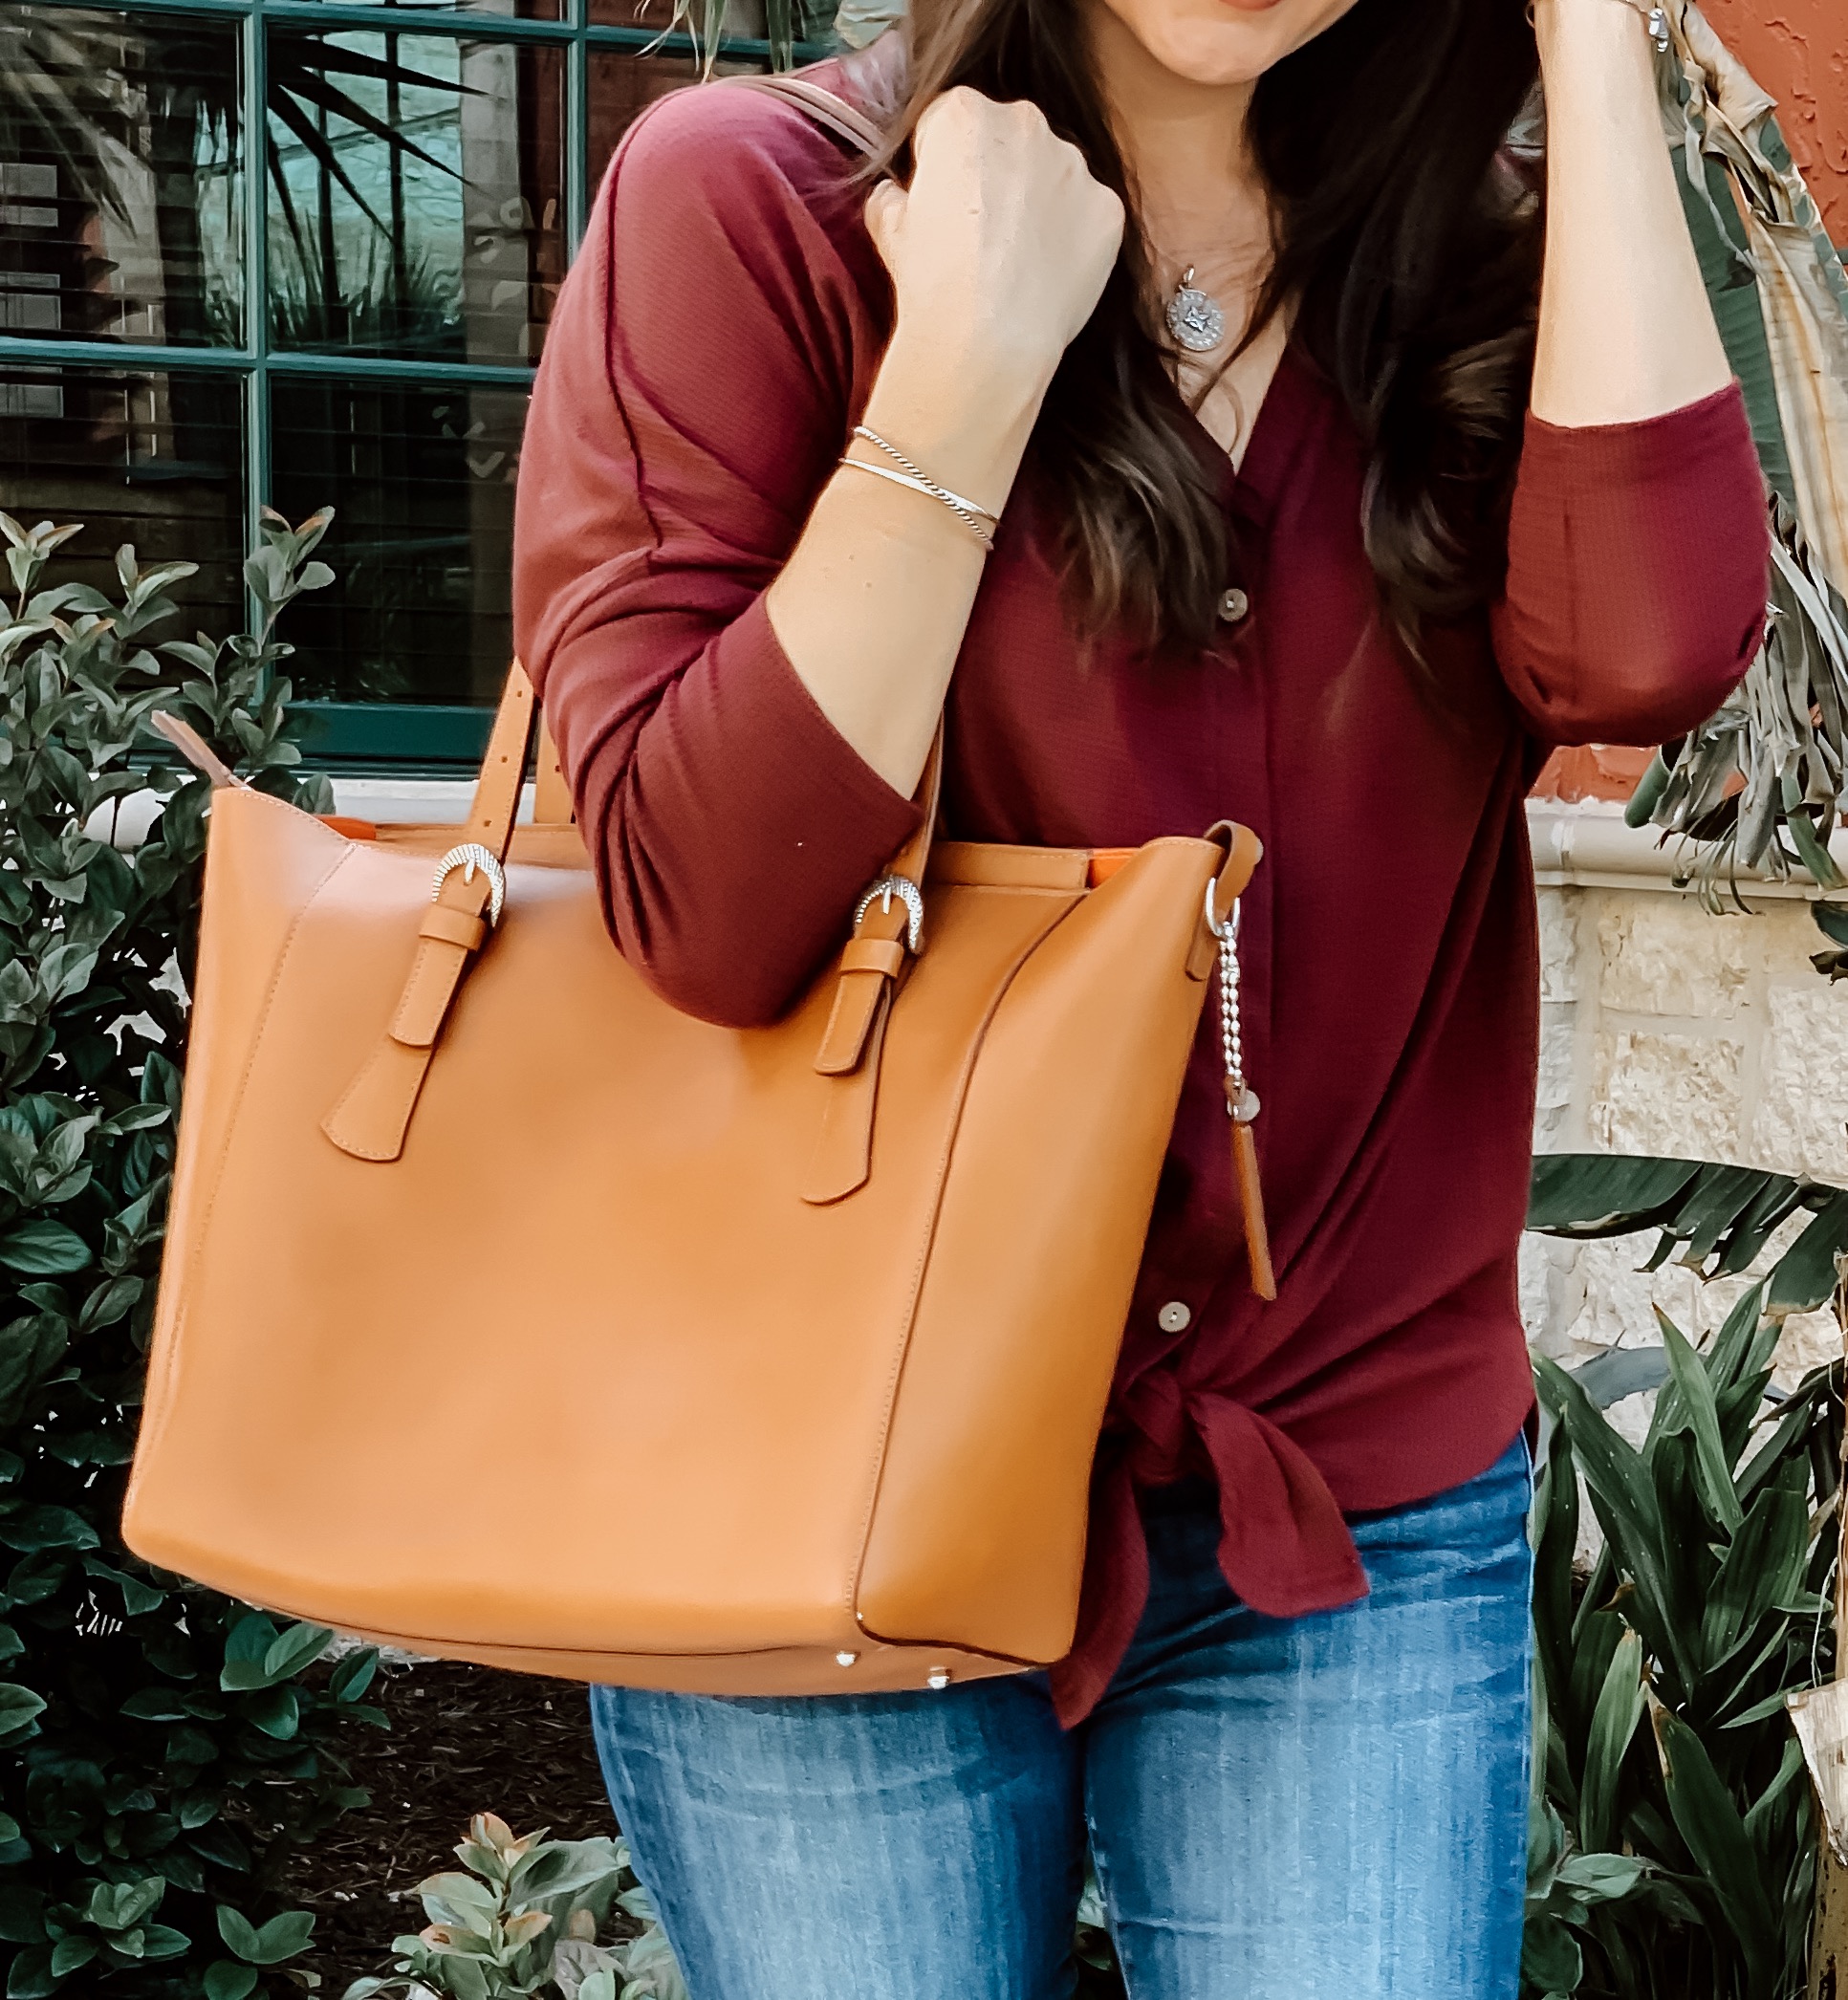 The Only Tote You Need for All Your Fall Outfits - Cathedrals & Cafes Blog